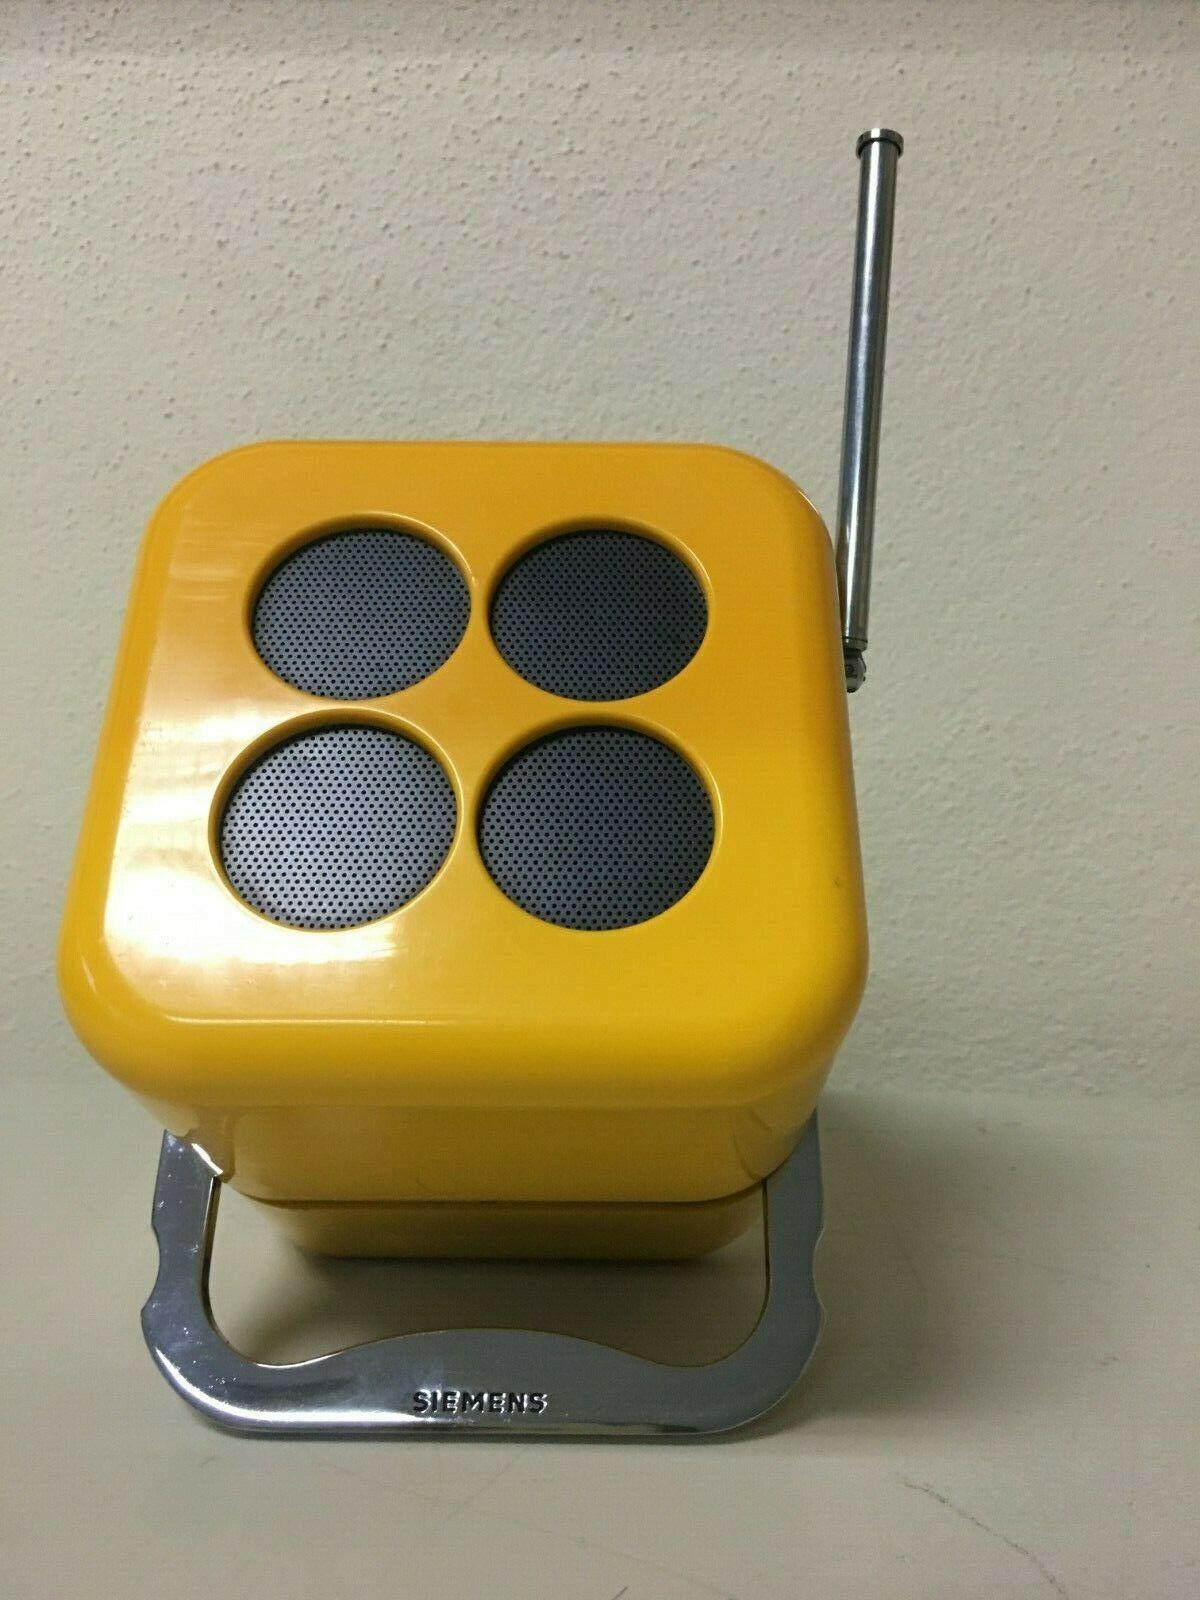 Radio by Mario Bellini, made by Siemens in 1968. Powered by batteries but can also run off the mains. Remains fully functional and has a power cord, Eight 1.5V type C batteries can be used but are not included. 220/145 Volt (can be switched).